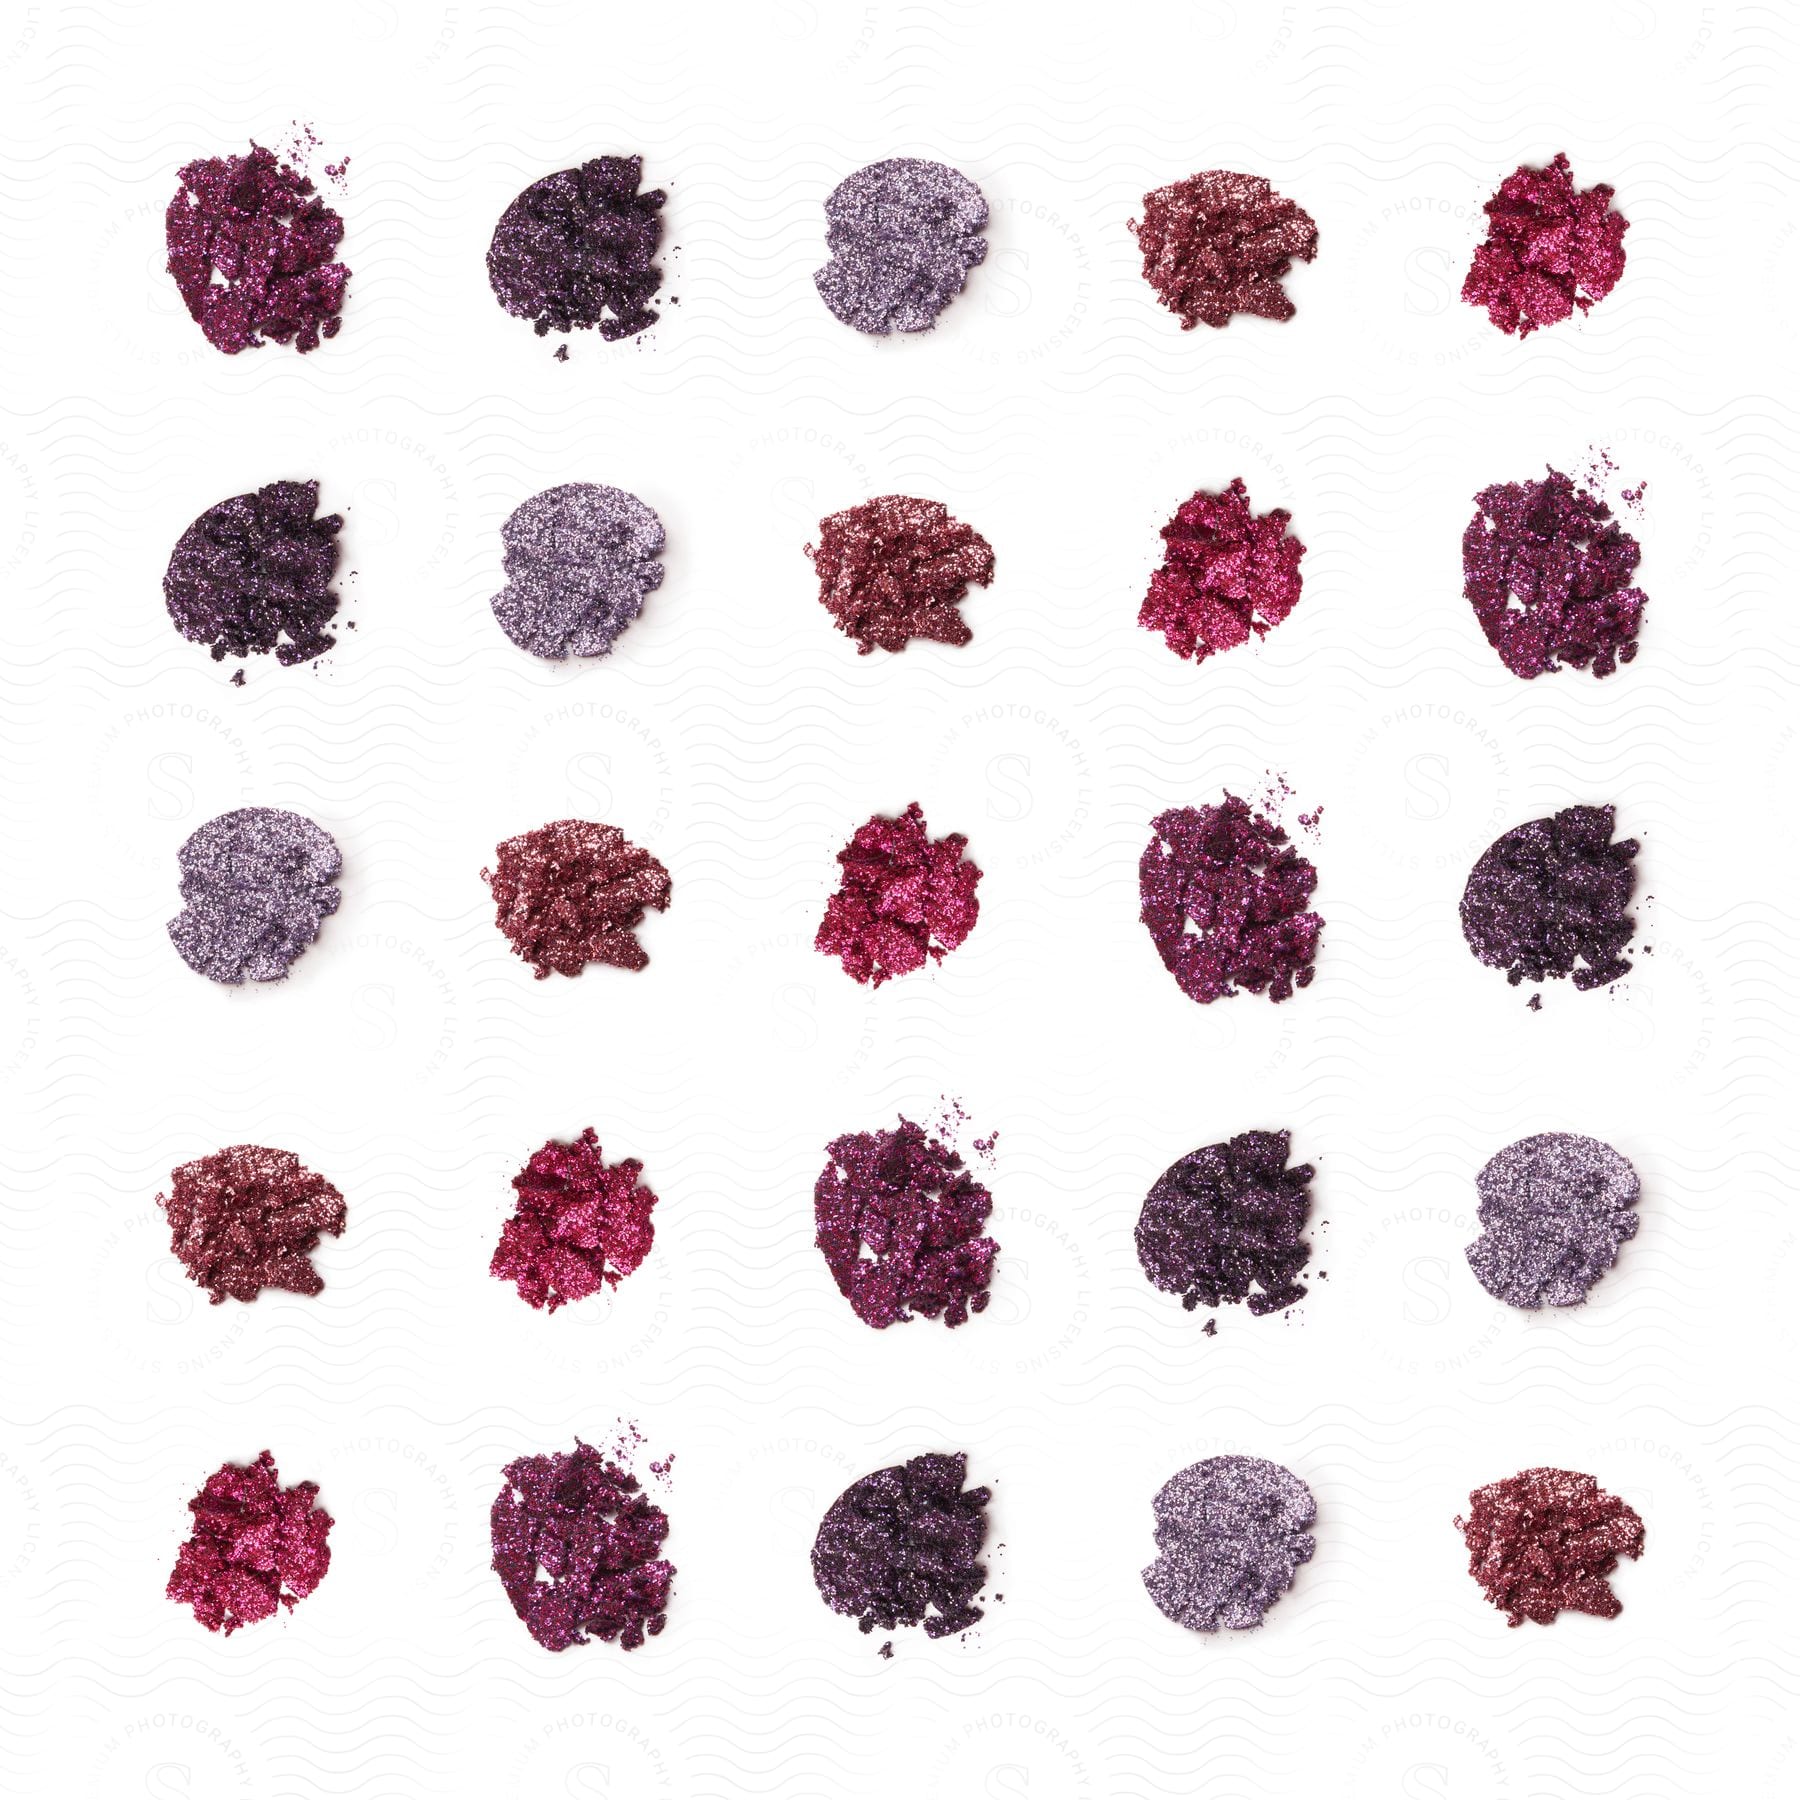 Eyeshadow color swatches in shades of pink and purple